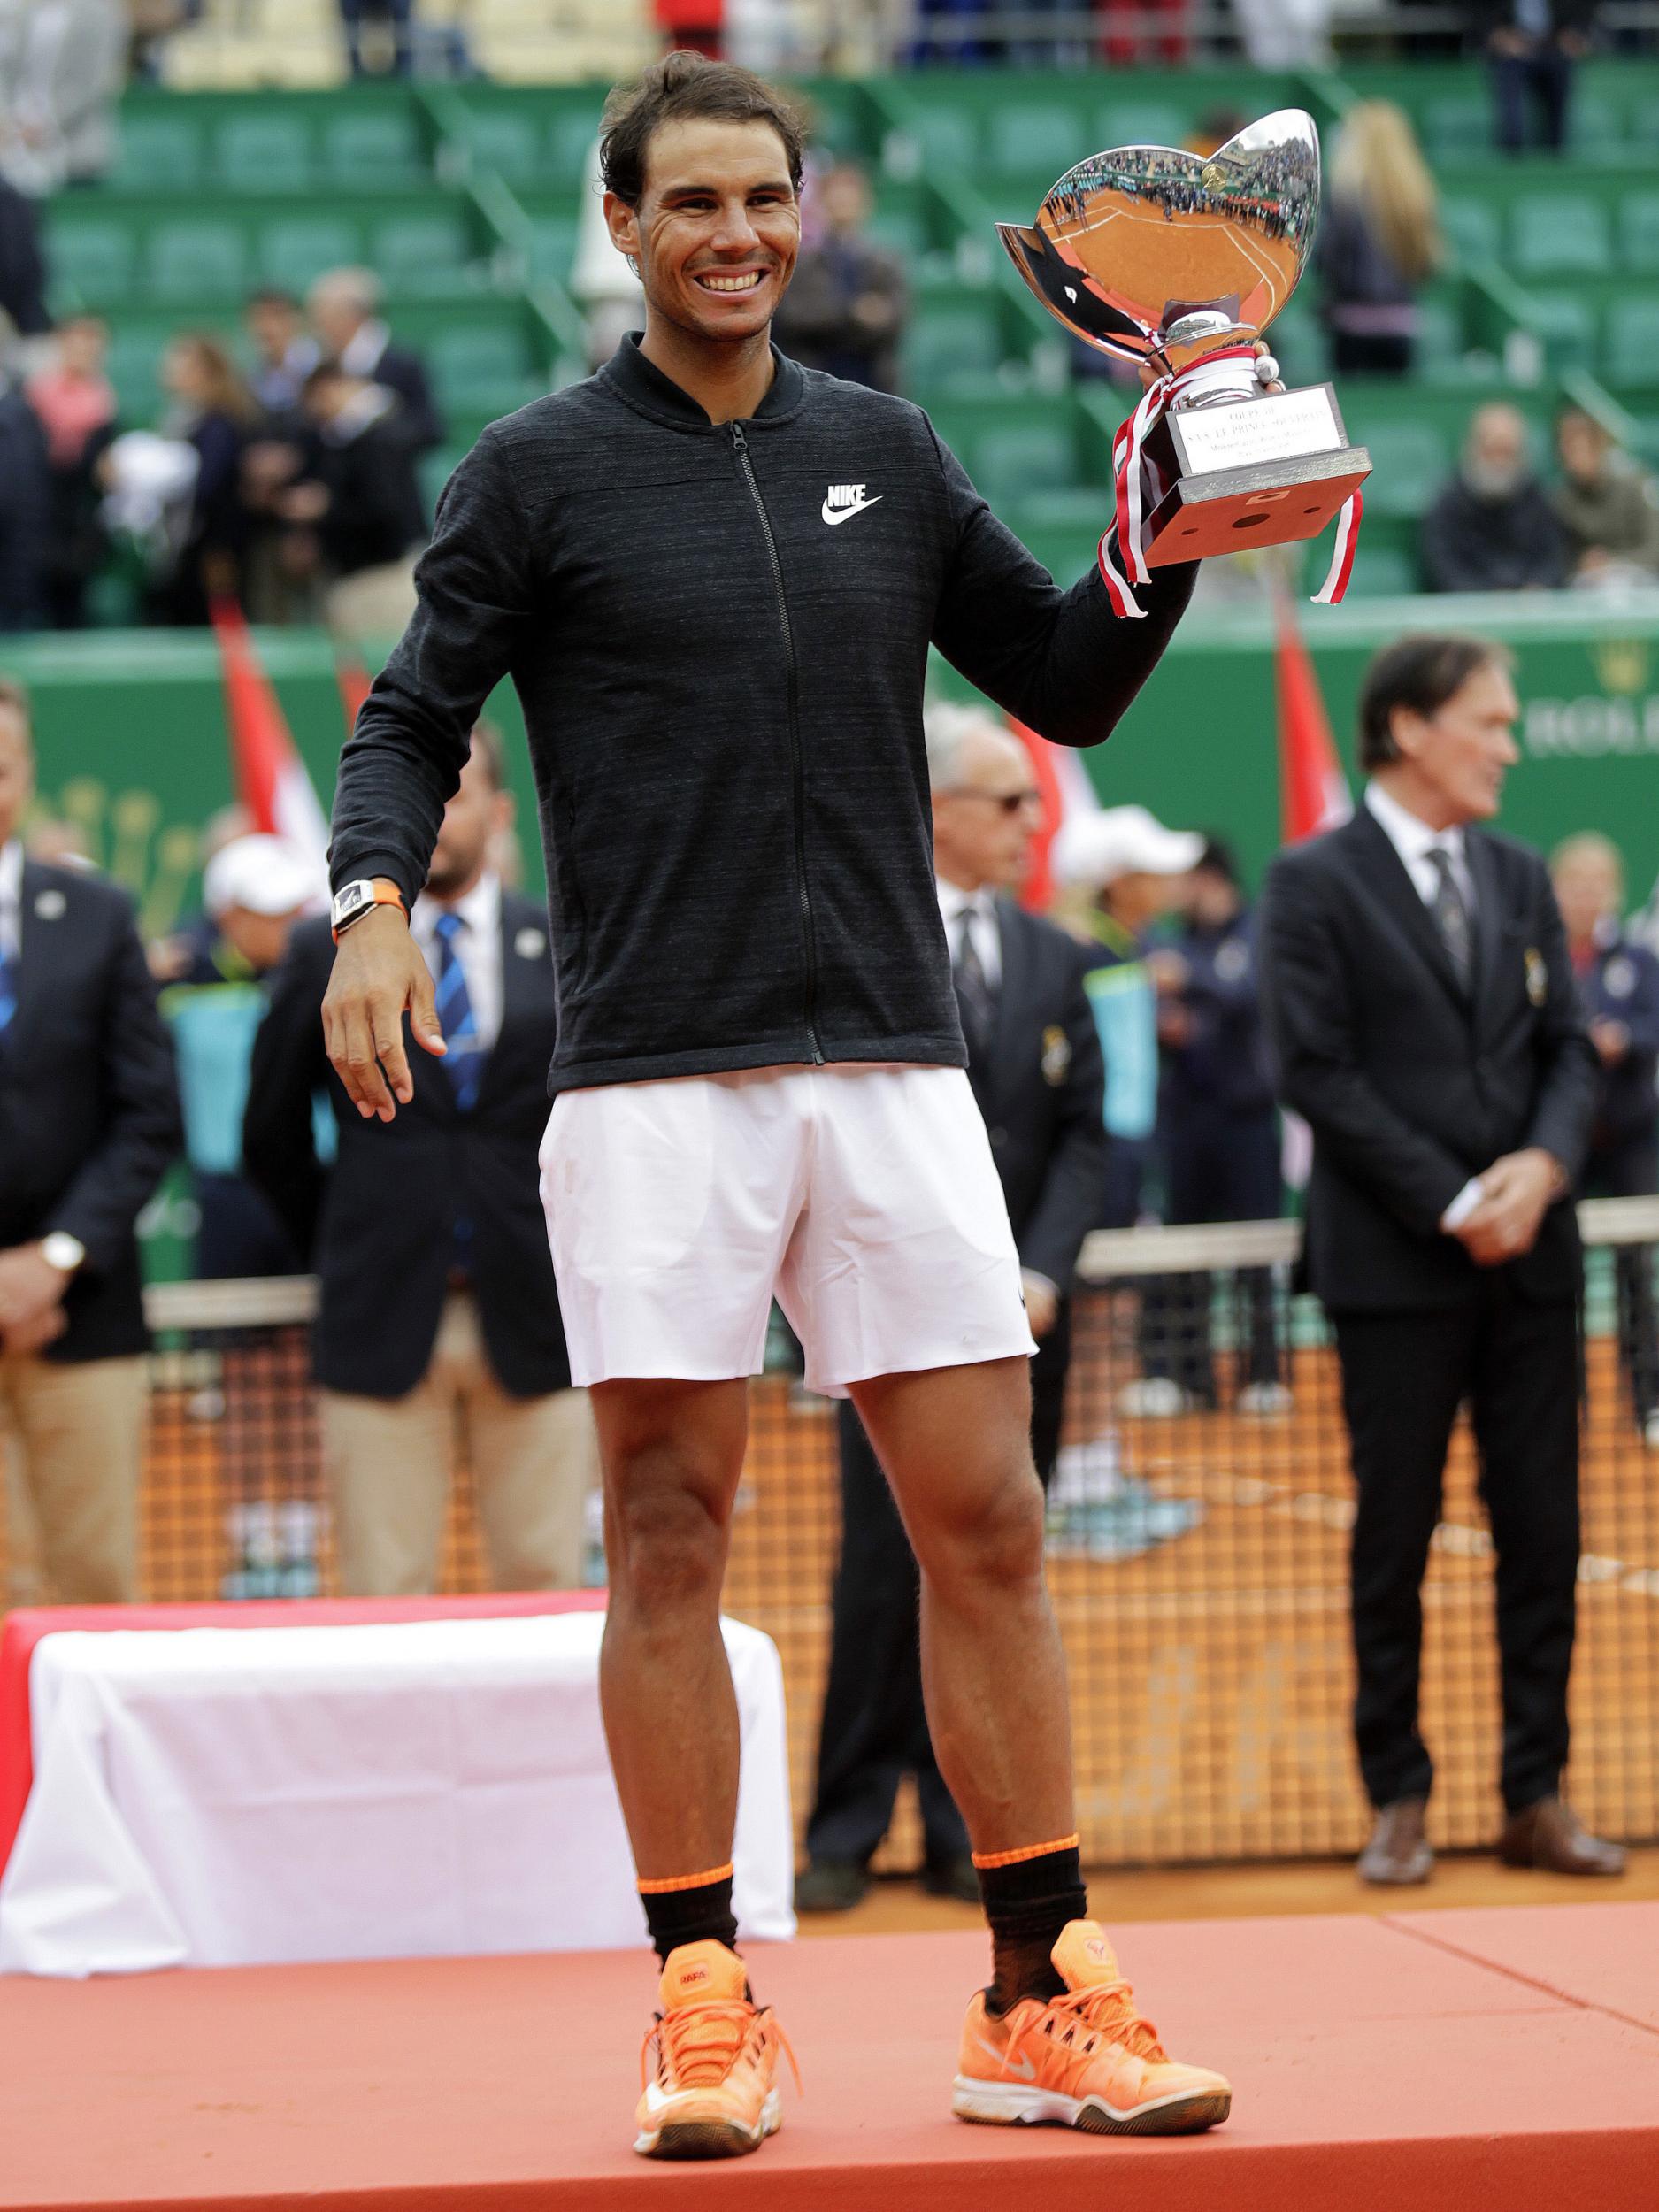 Nadal with his tenth Monte Carlo Masters trophy